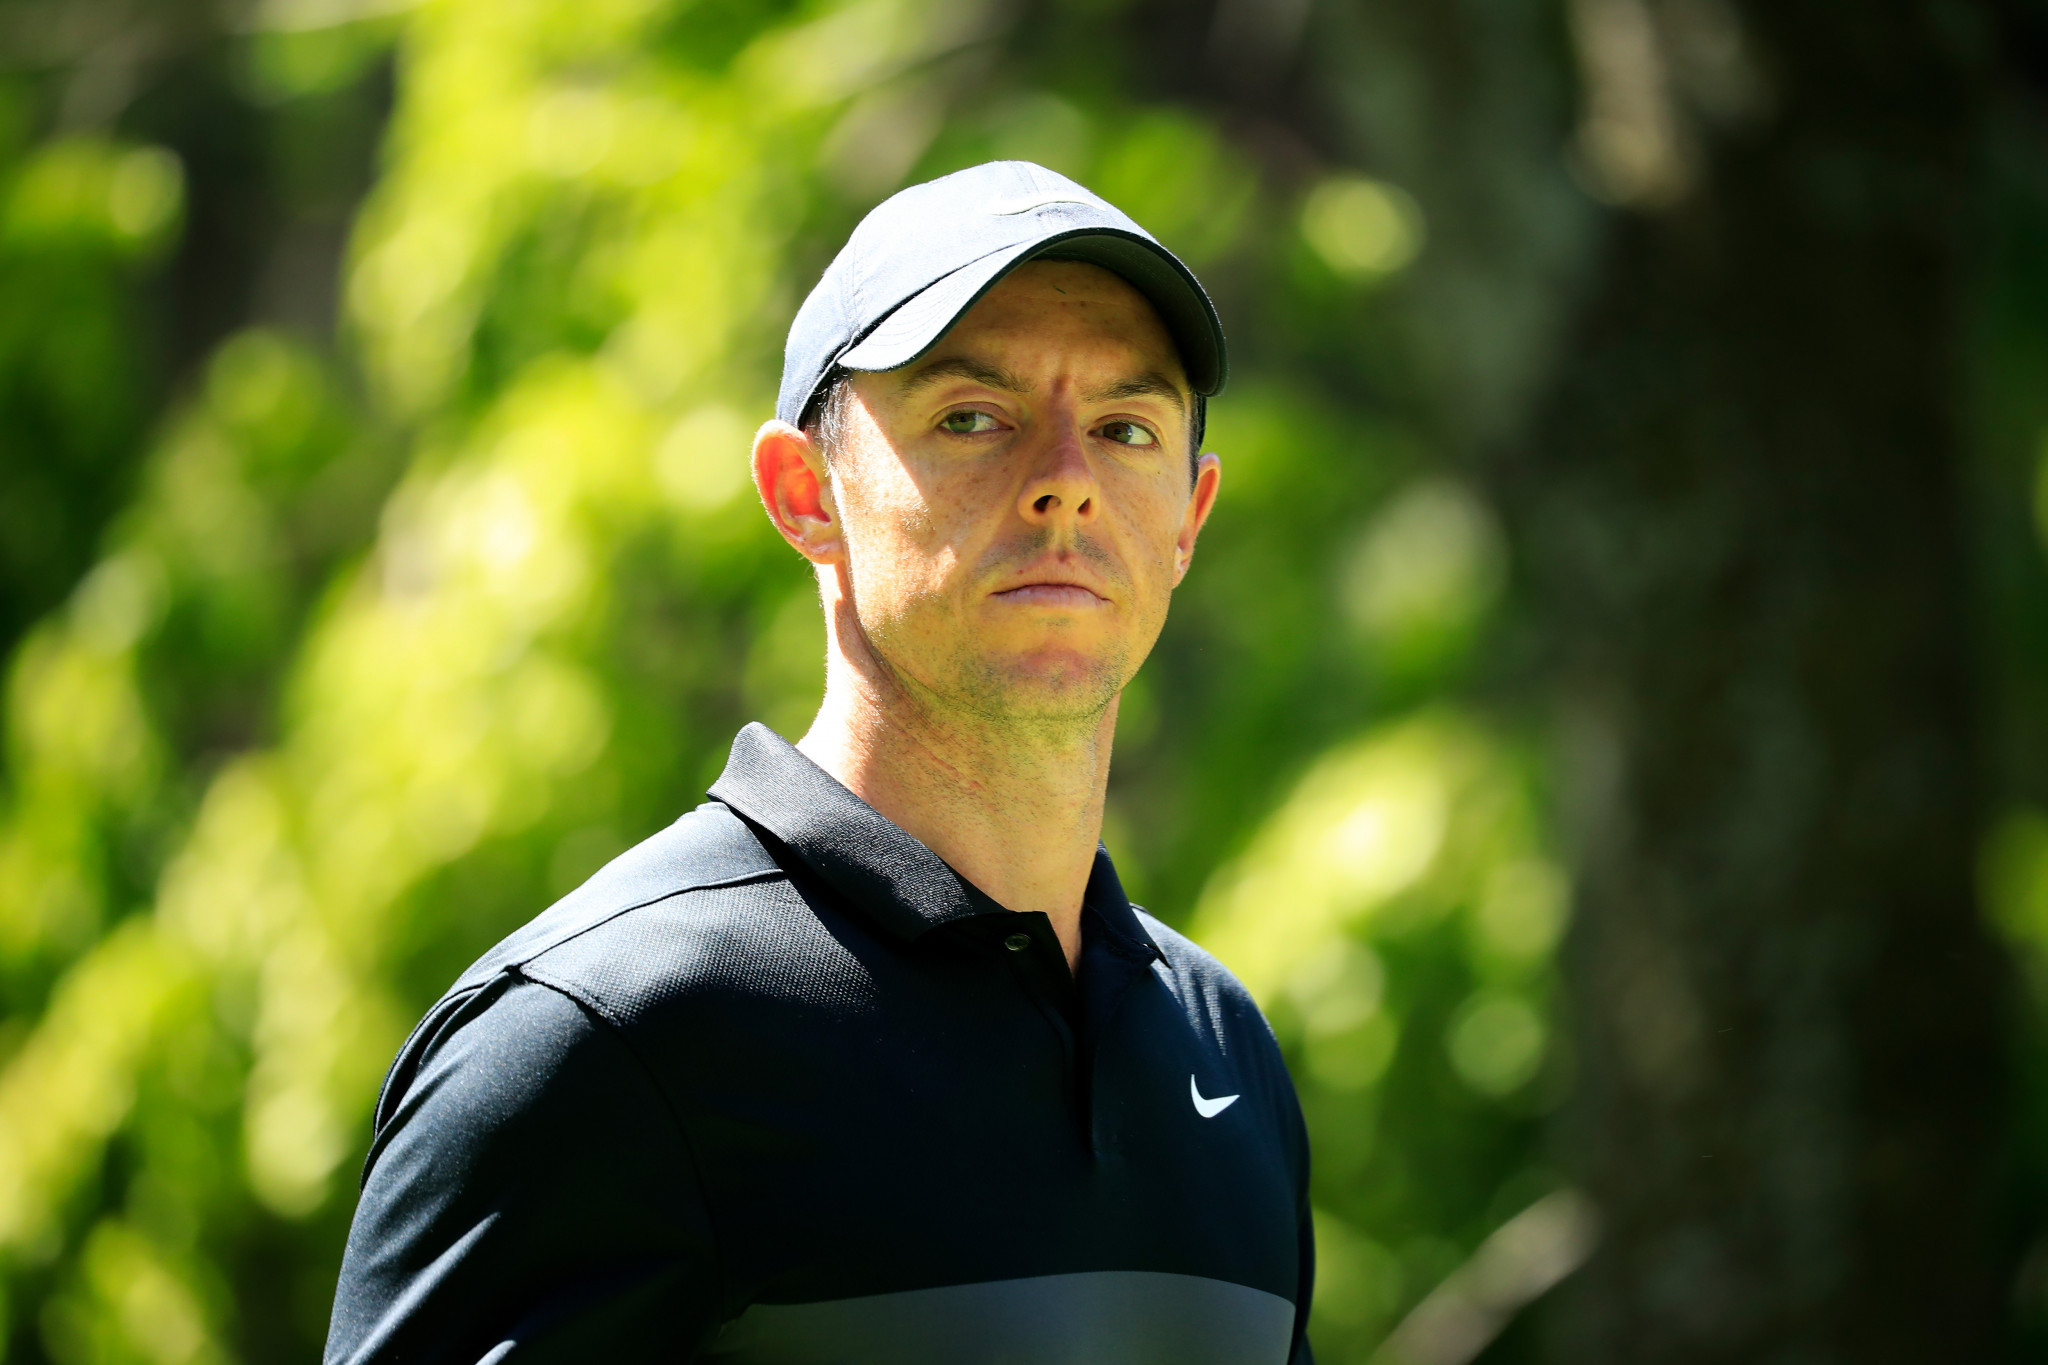 Rory McIlroy has a two-shot lead on day one of four ahead of Americans Bubba Watson and Justin Thomas at the WGC-Mexico Championship in Naucalpan ©Getty Images